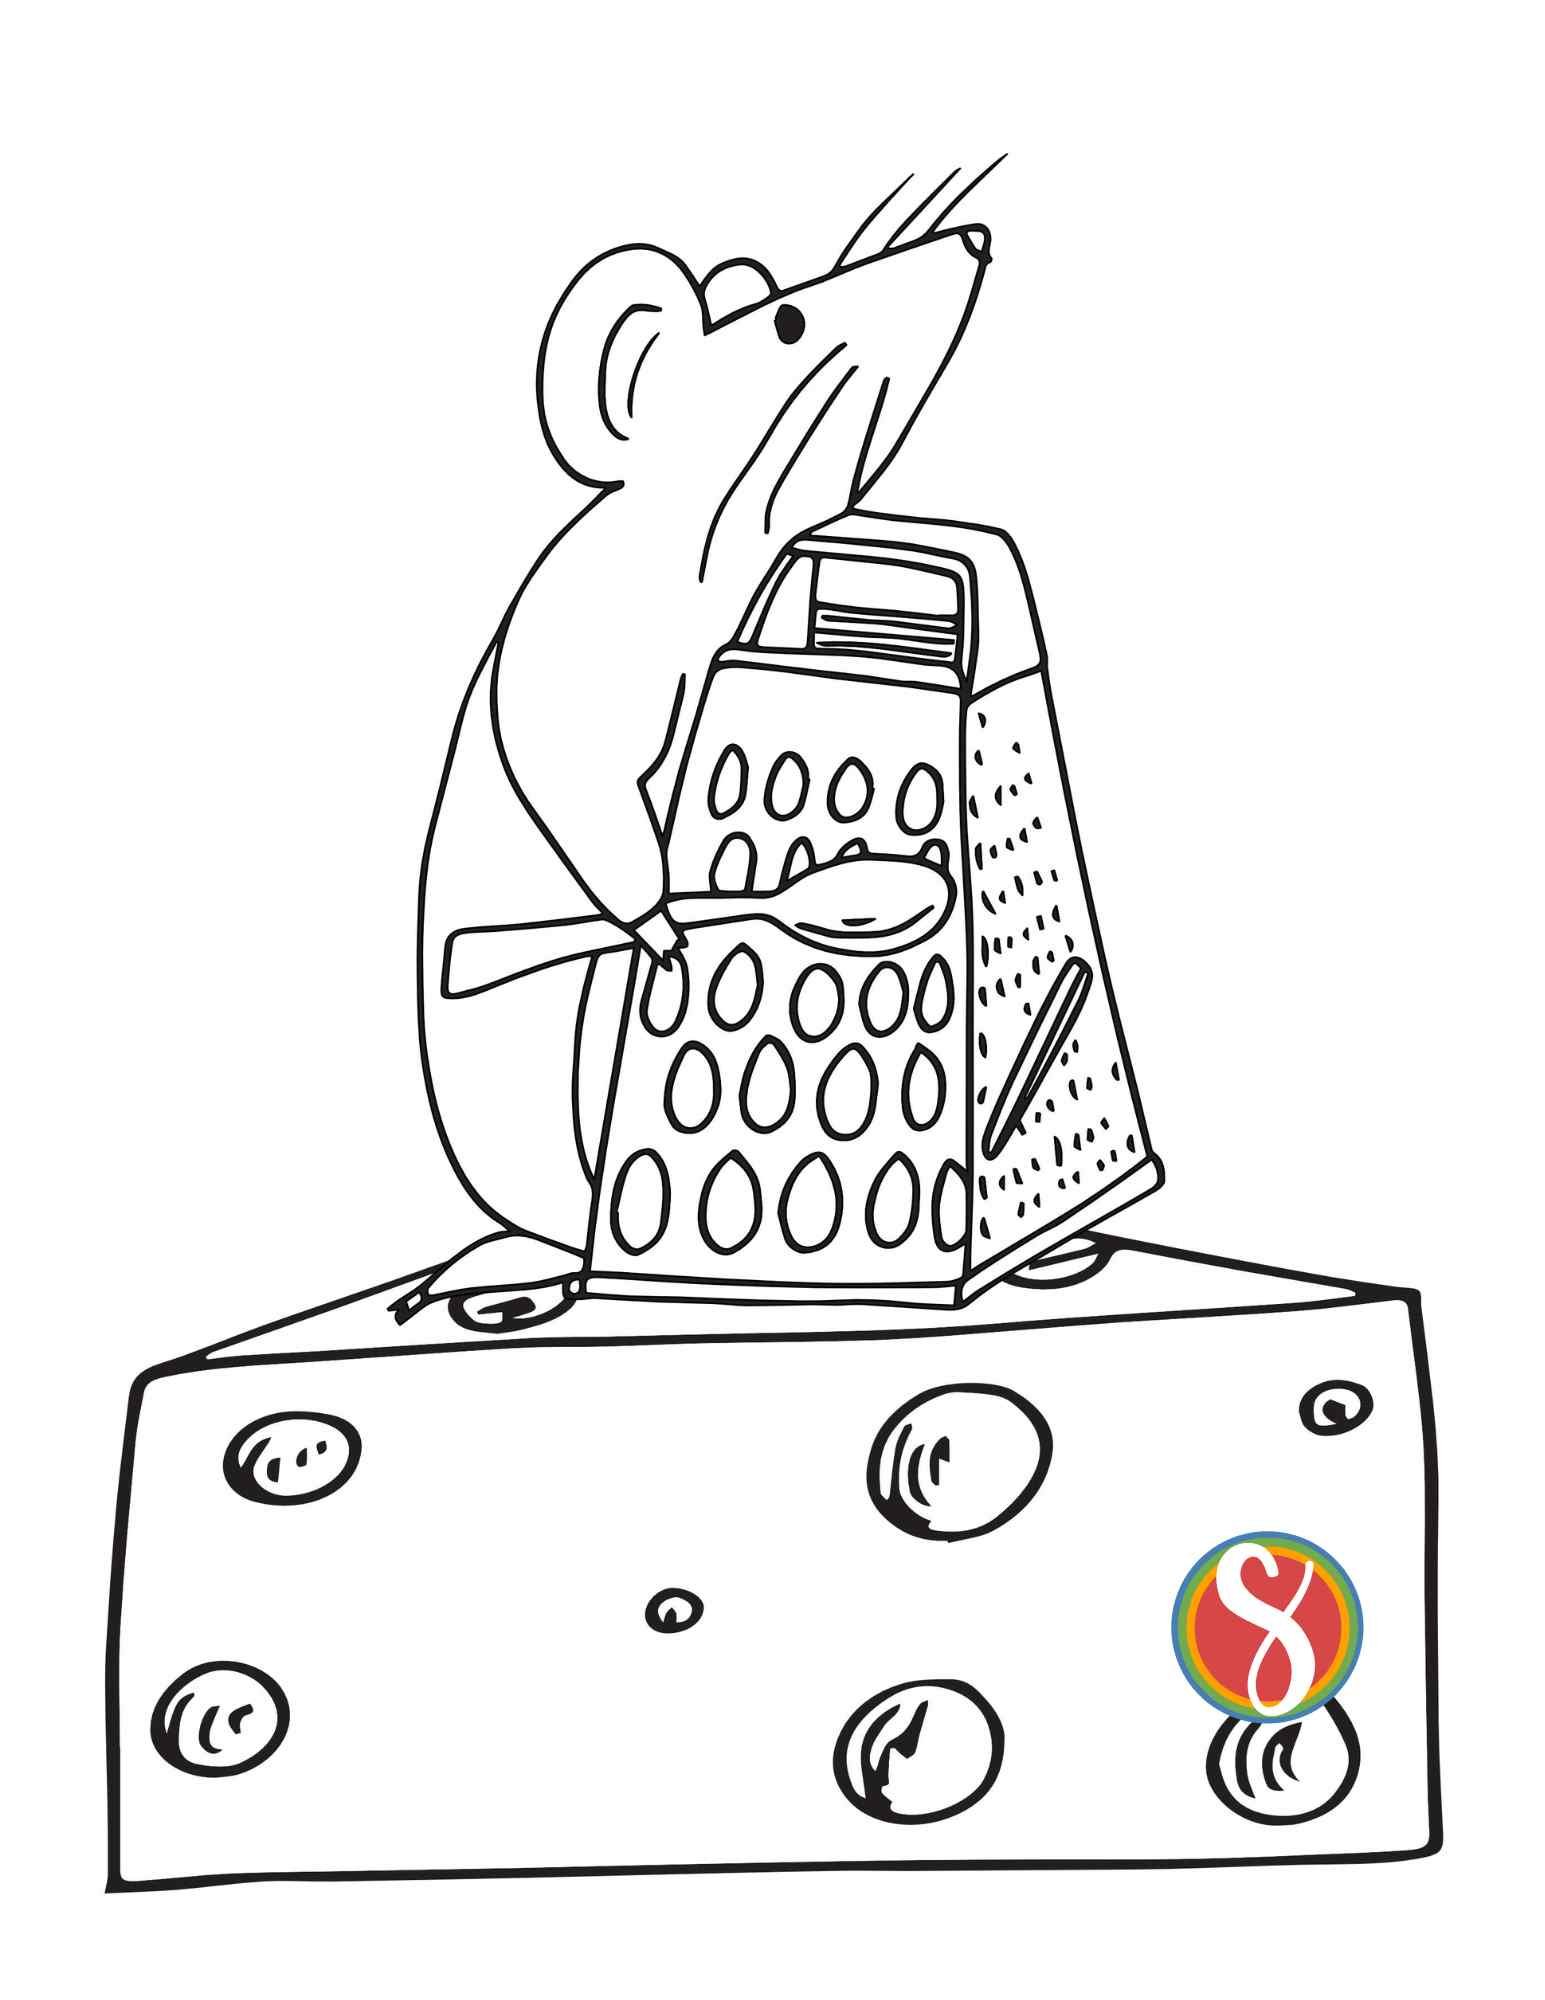 mouse color sheet with mouse playing a cheese grater with a spoon on top of a block of cheese